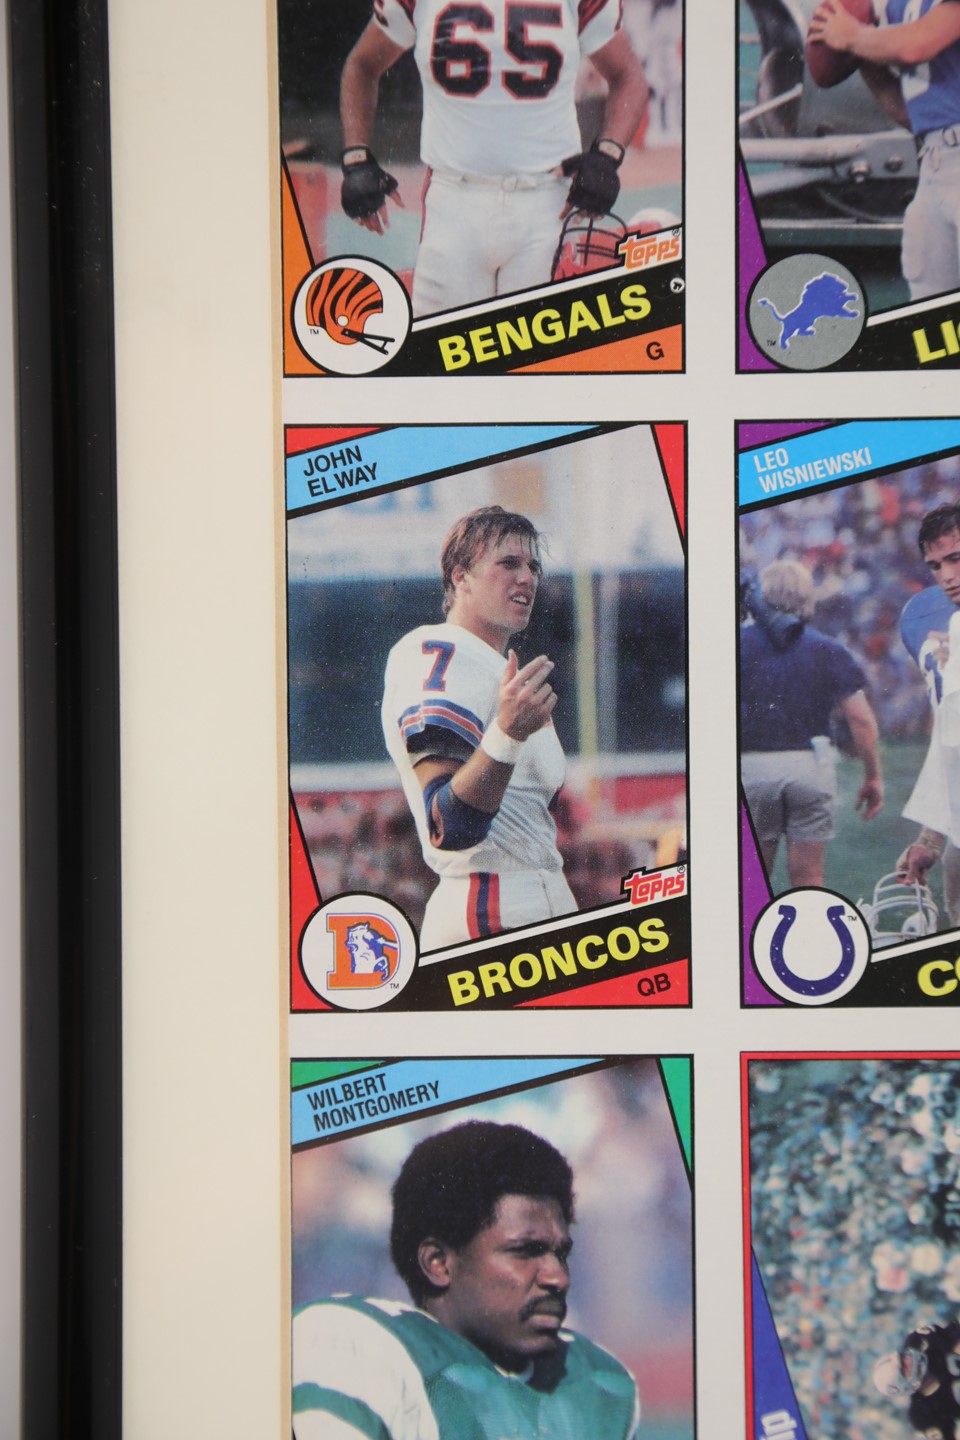 1984 Topps Football Uncut Sheet with Marino and Elway Rookies